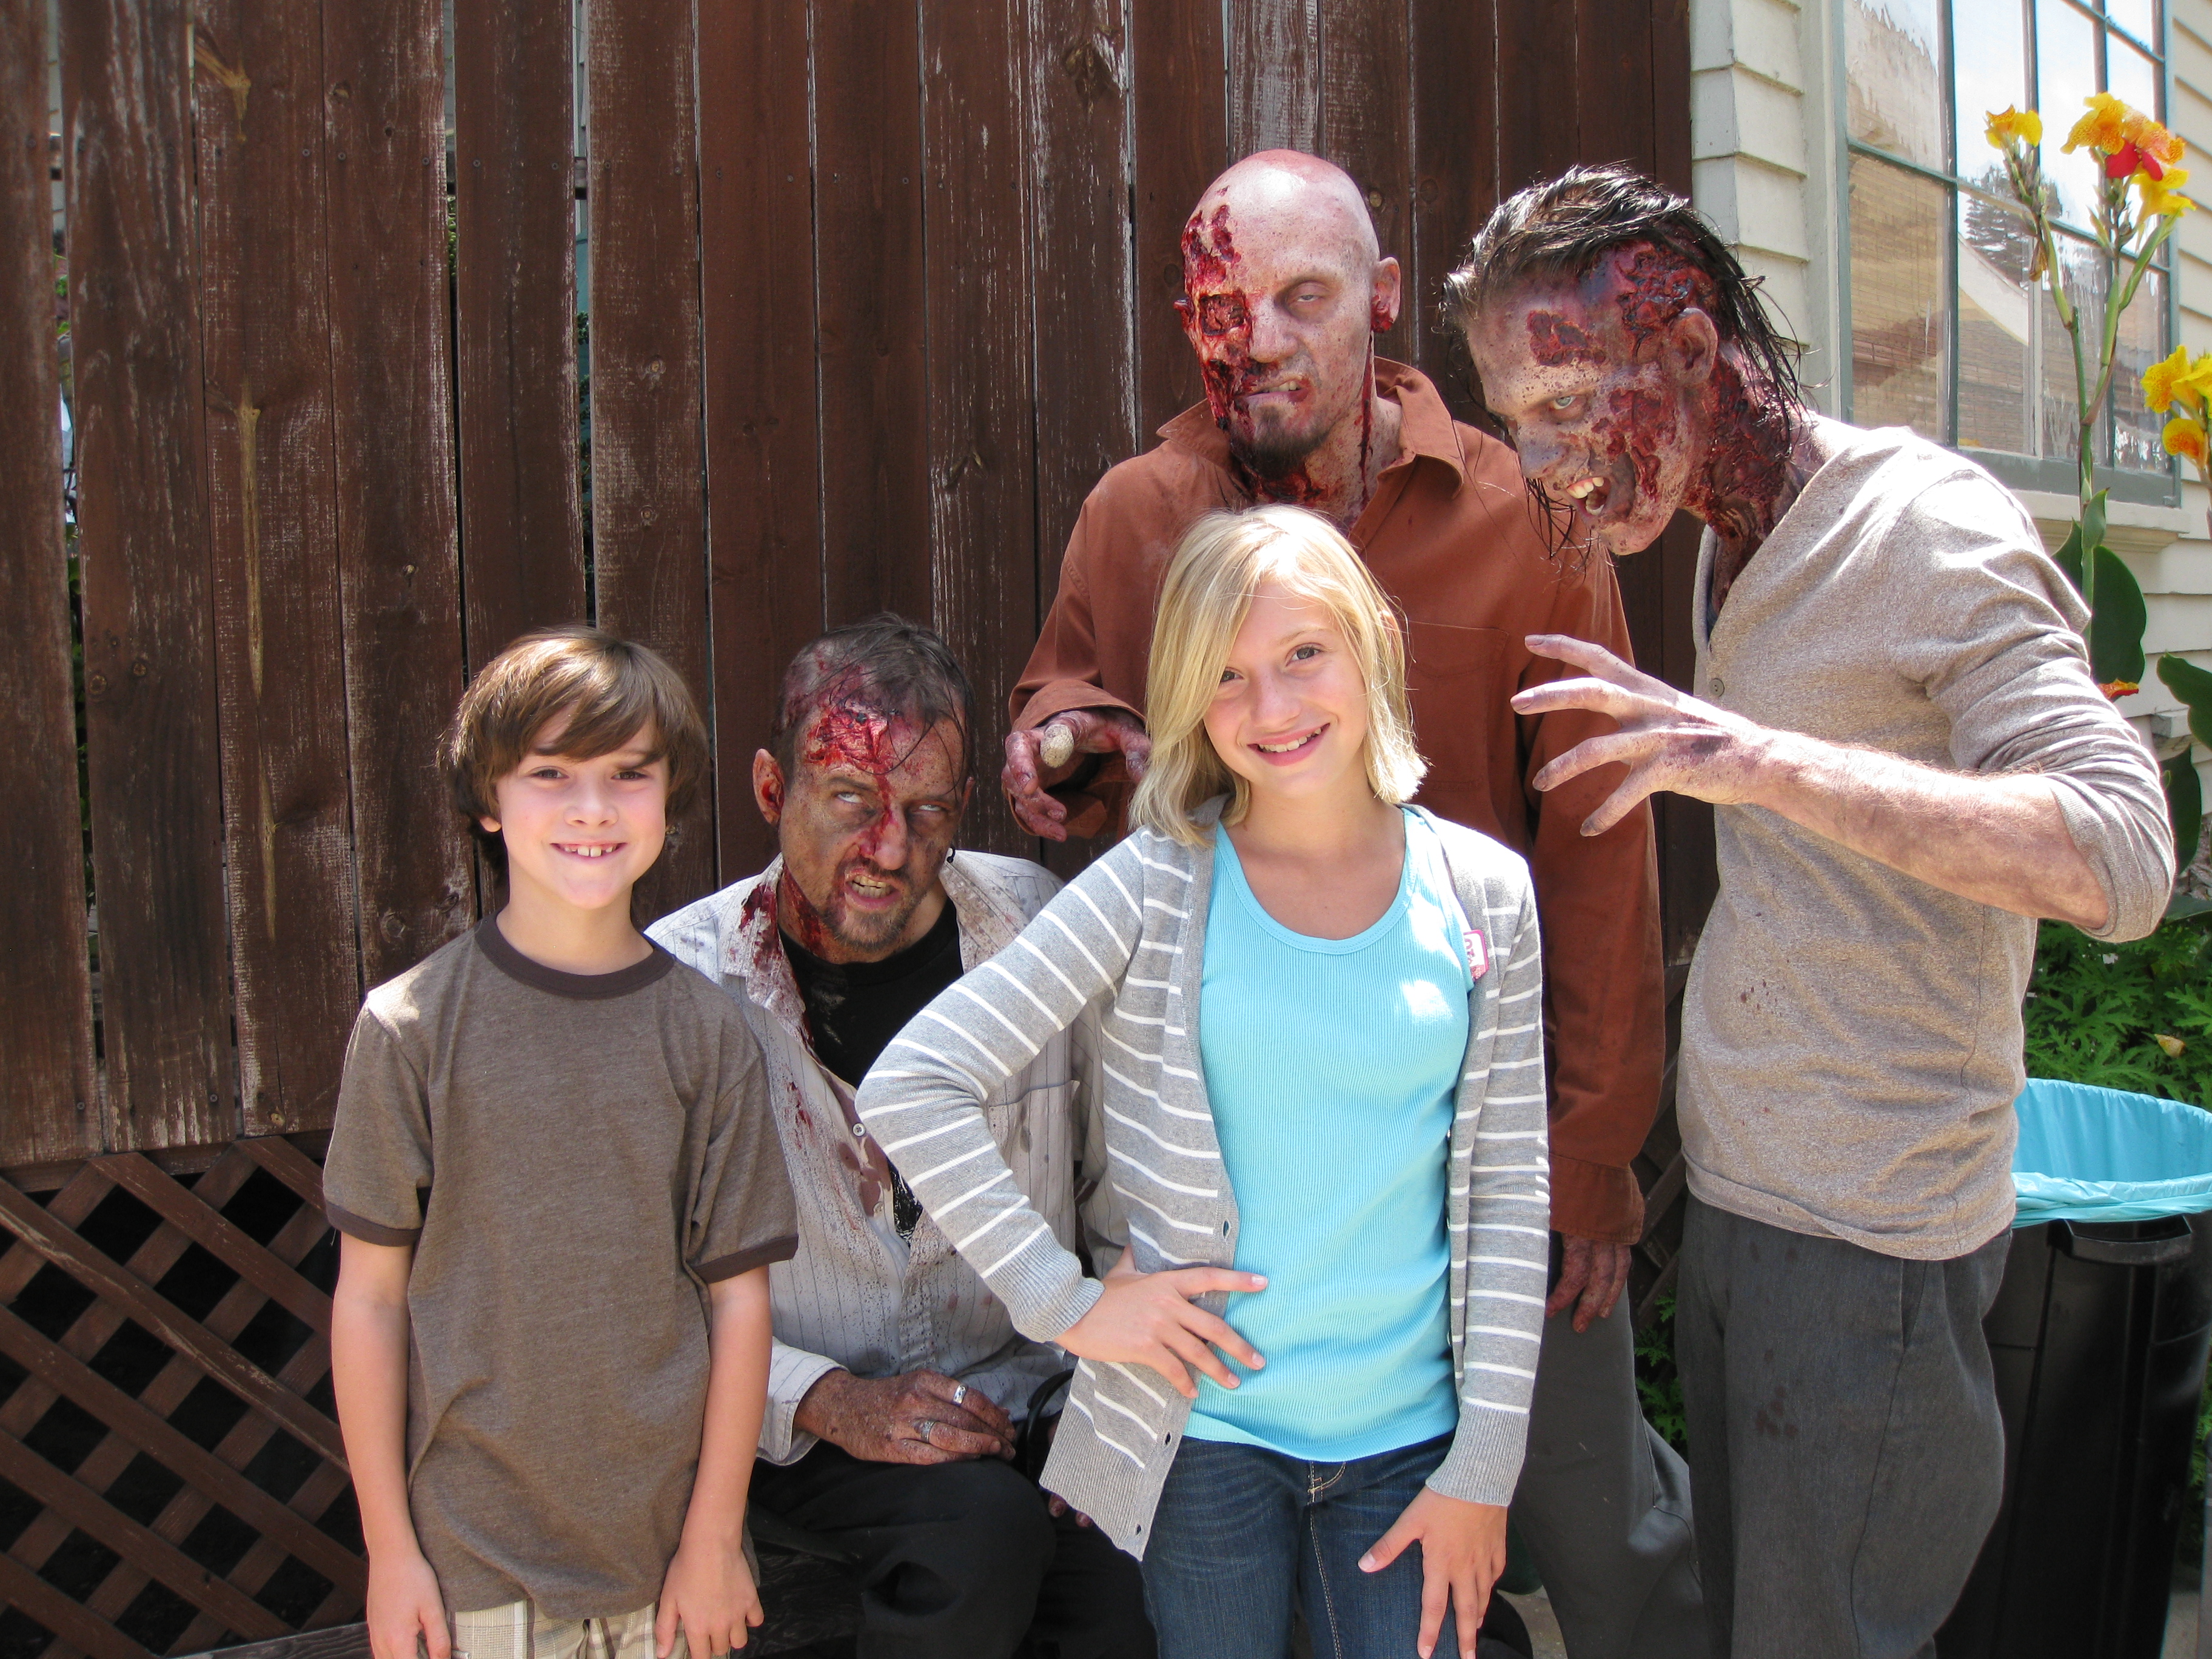 Griffin Cleveland, Madison Leisel and ZOMBIES on the set of Walking Dead.